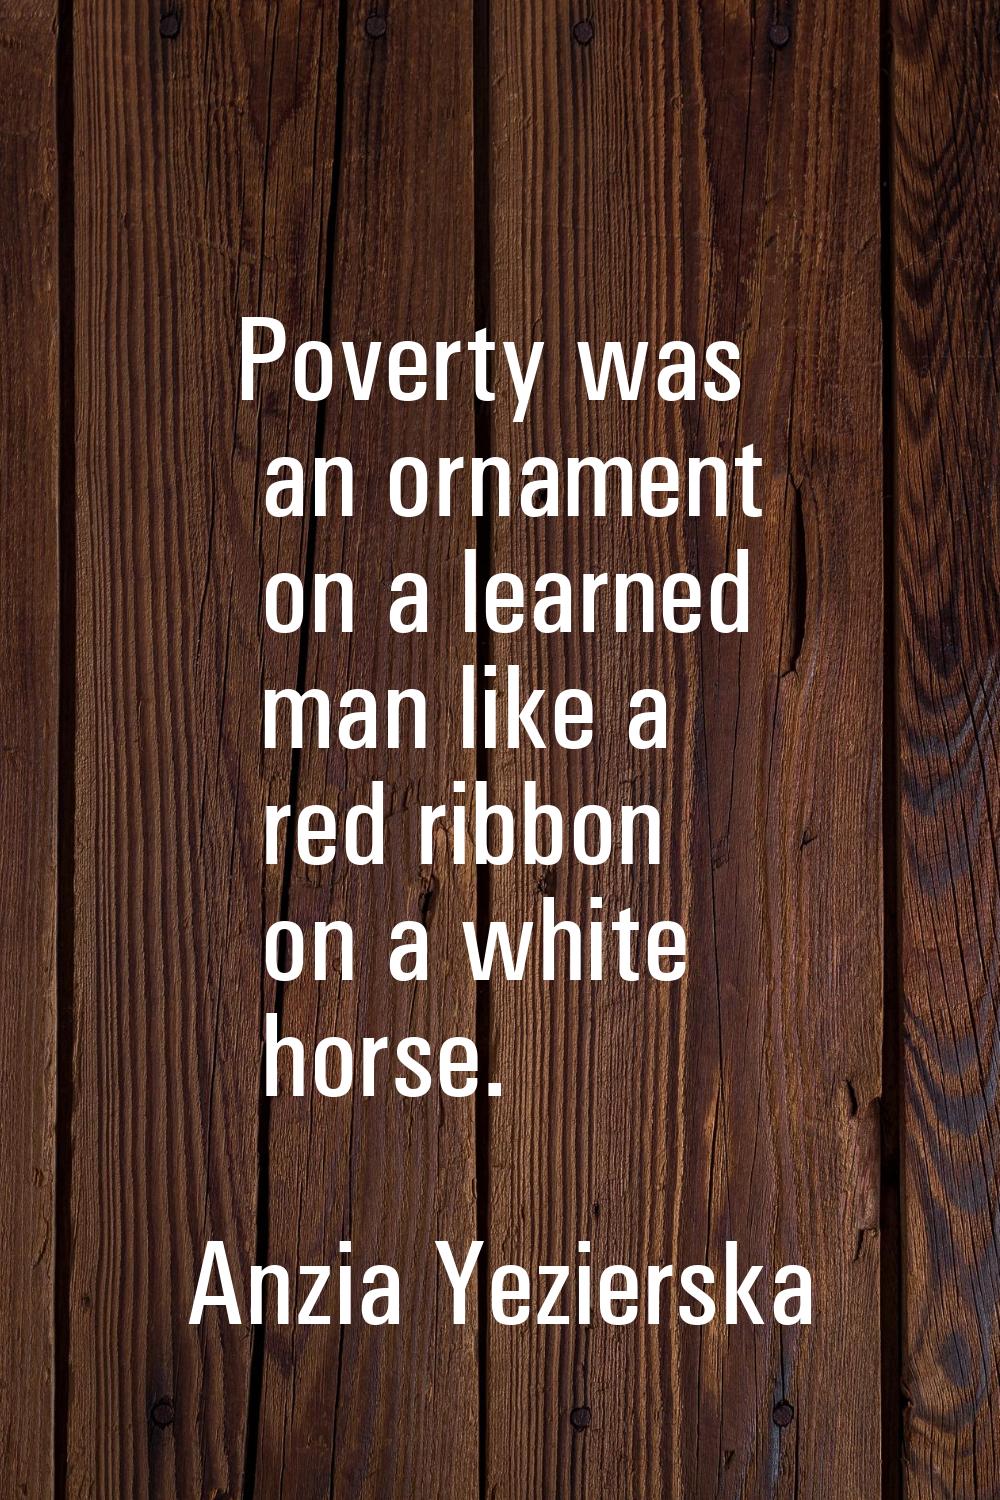 Poverty was an ornament on a learned man like a red ribbon on a white horse.